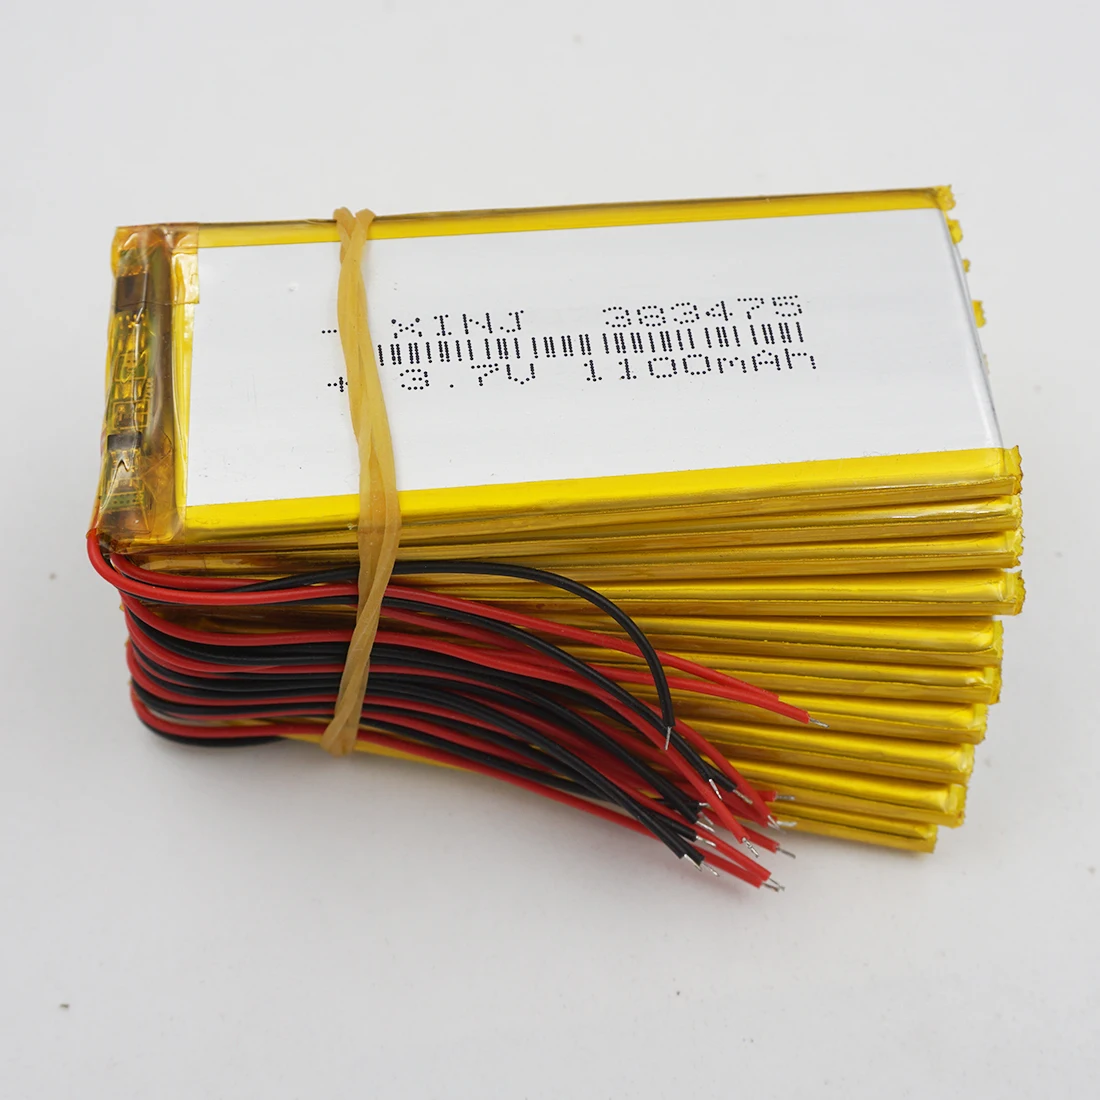 

XINJ 10pcs 3.7V 1100mAh Lithium Polymer Battery Lipo Cell 383475 For Camera E-Book Driving Telephone Watches Tablet PC